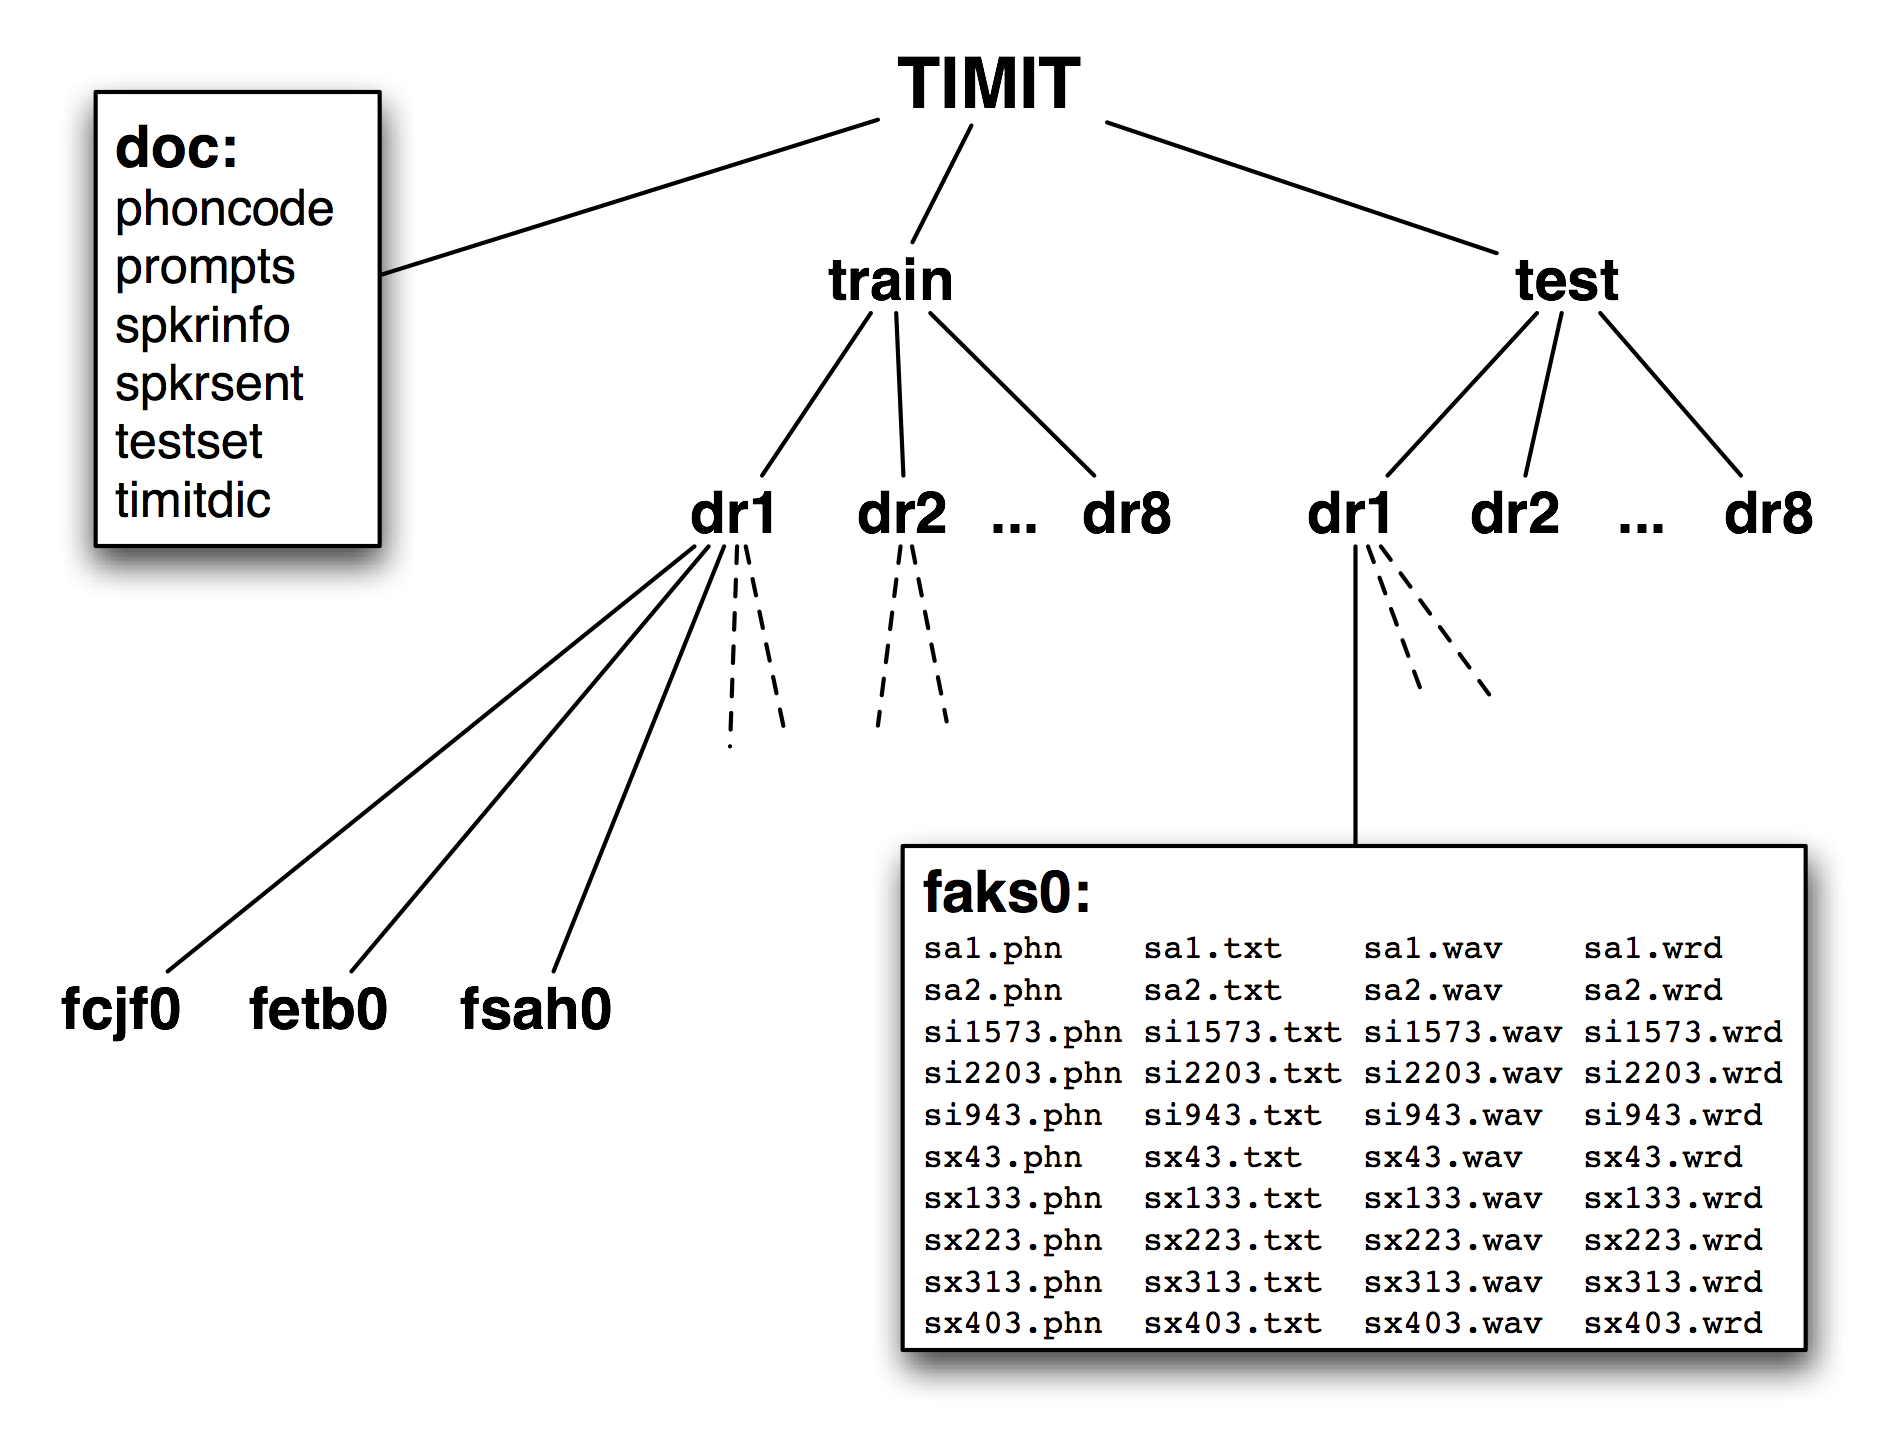 ../images/timit-structure.png